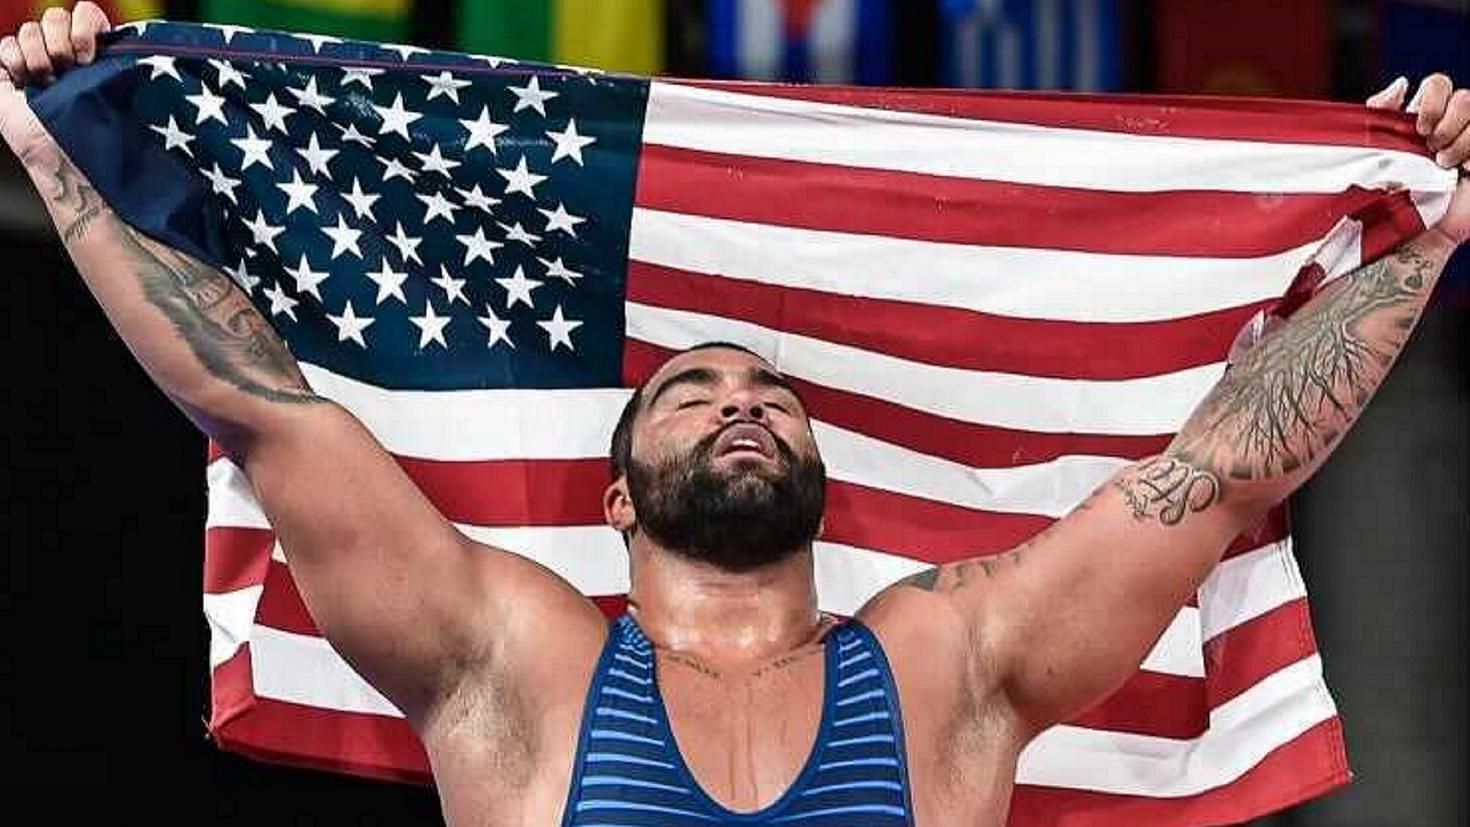 Gable Steveson is an Olympic Gold Medalist